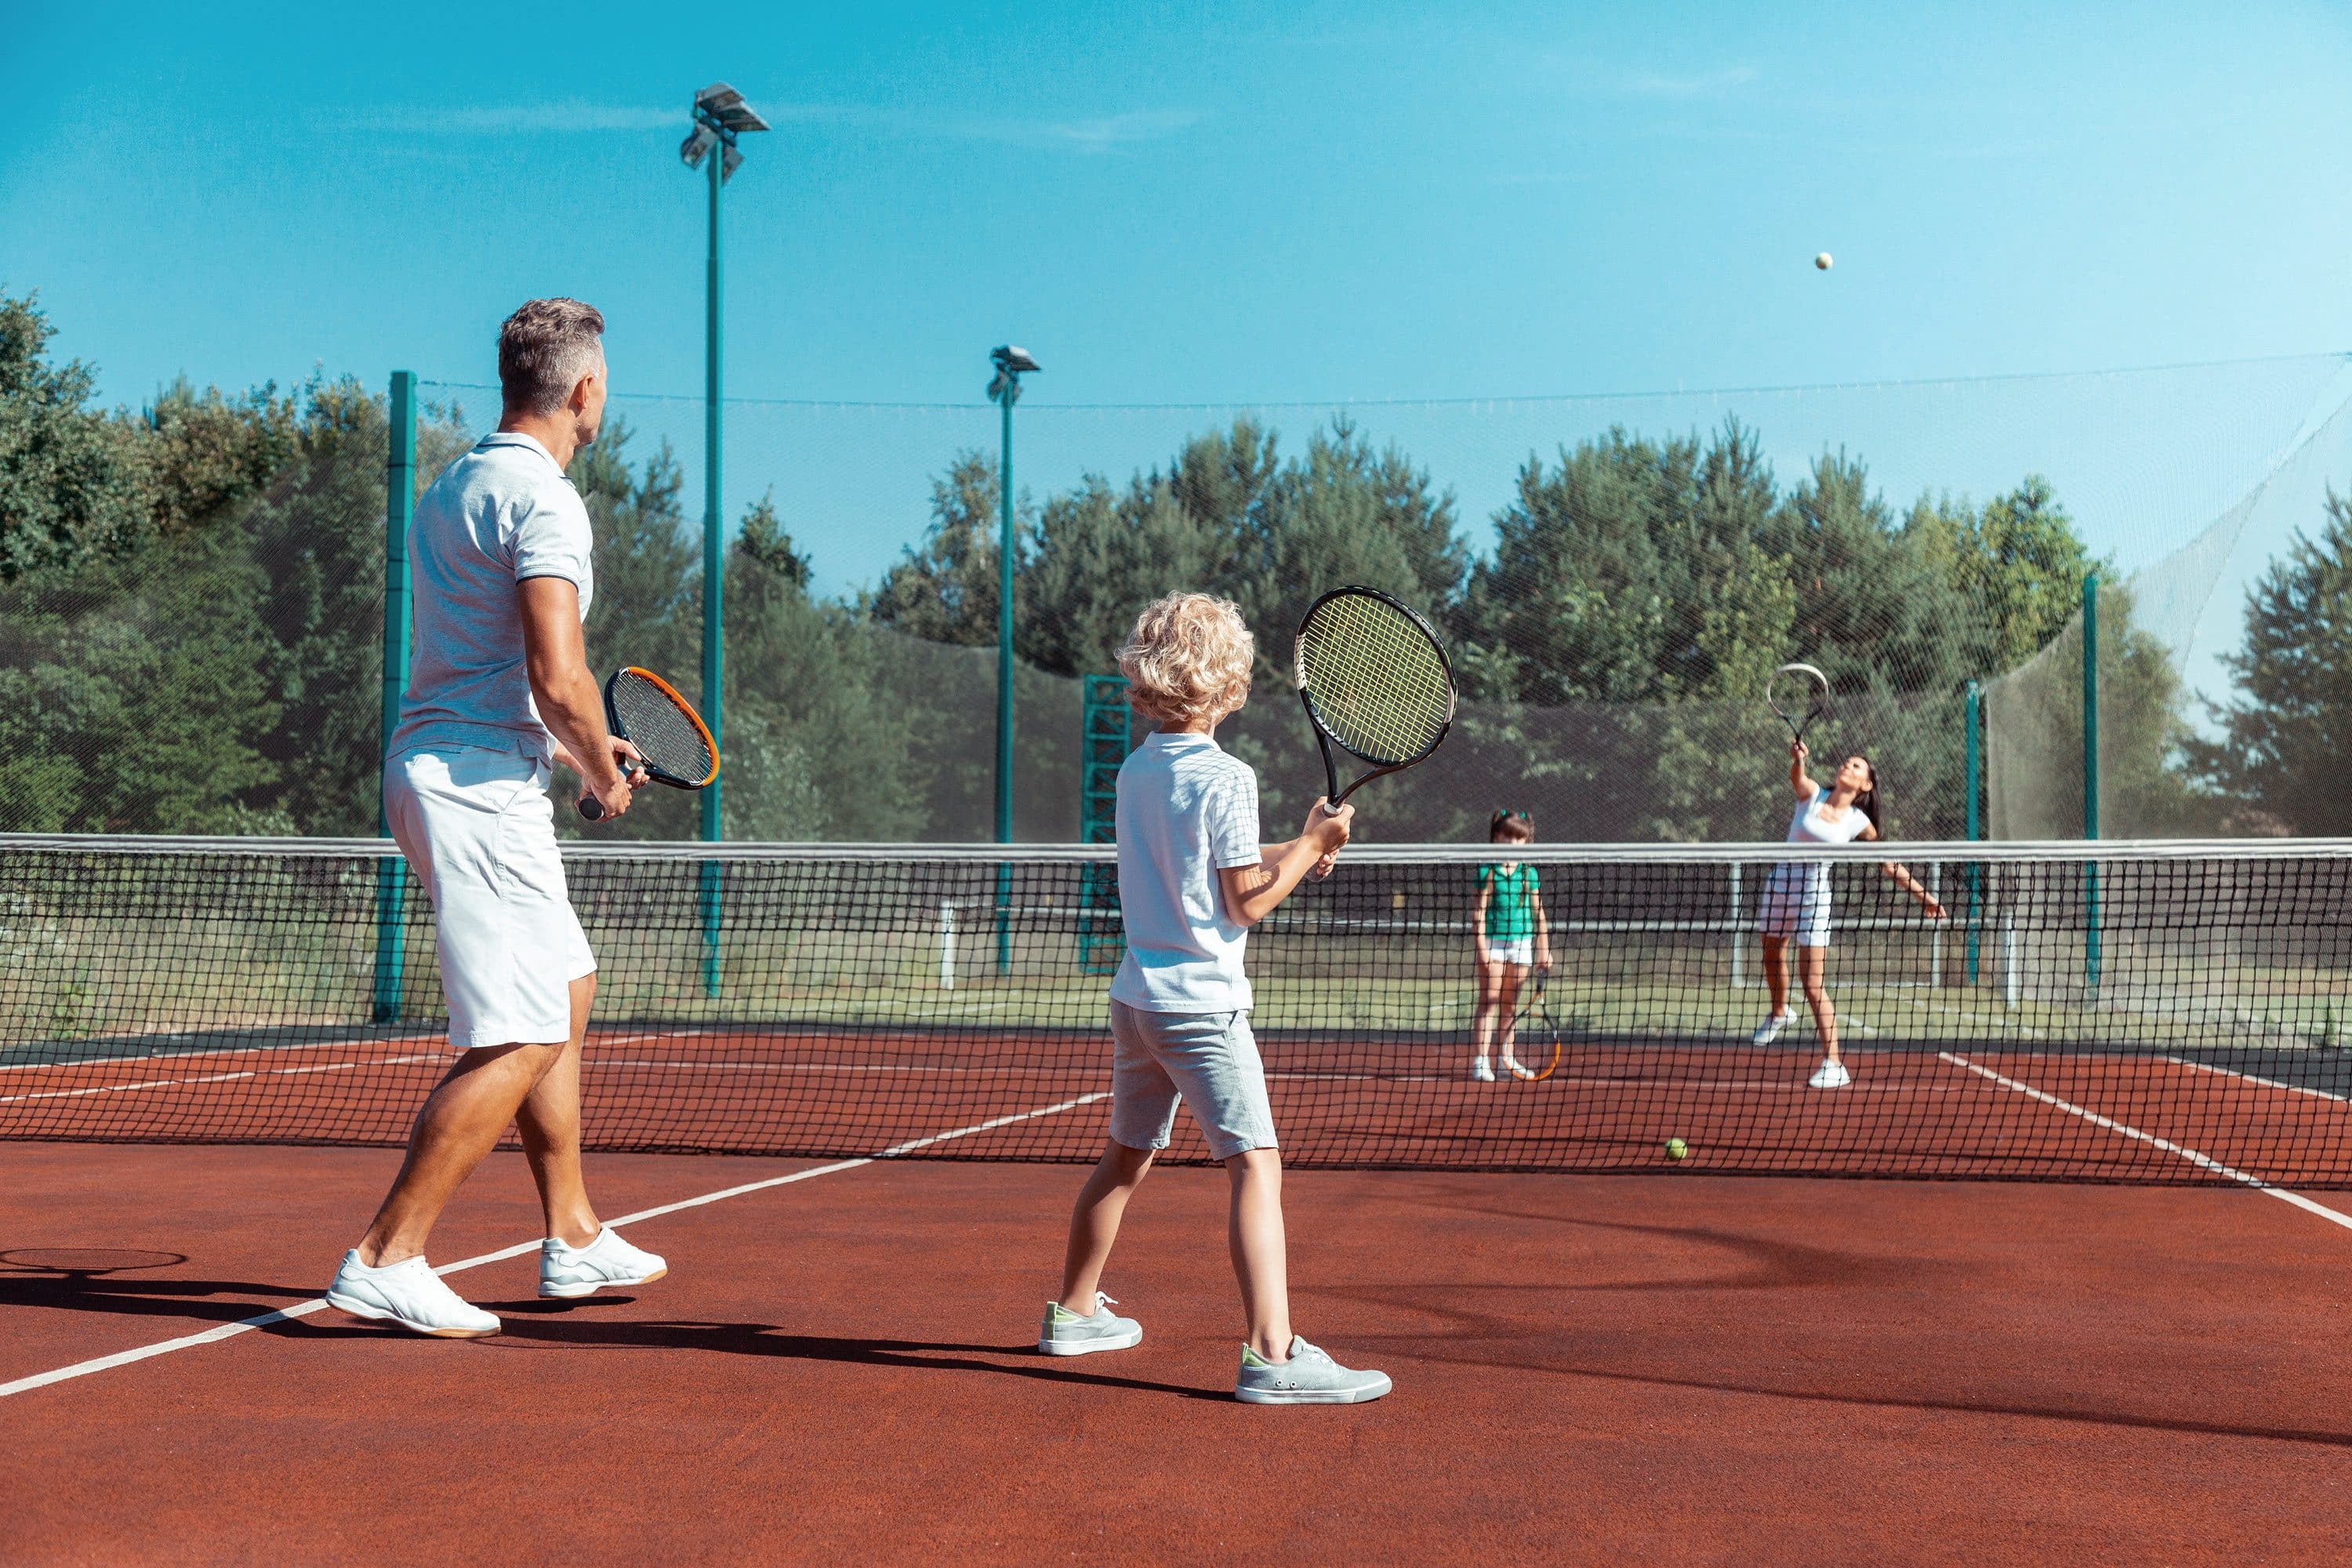 Father and child playing tennis on a court